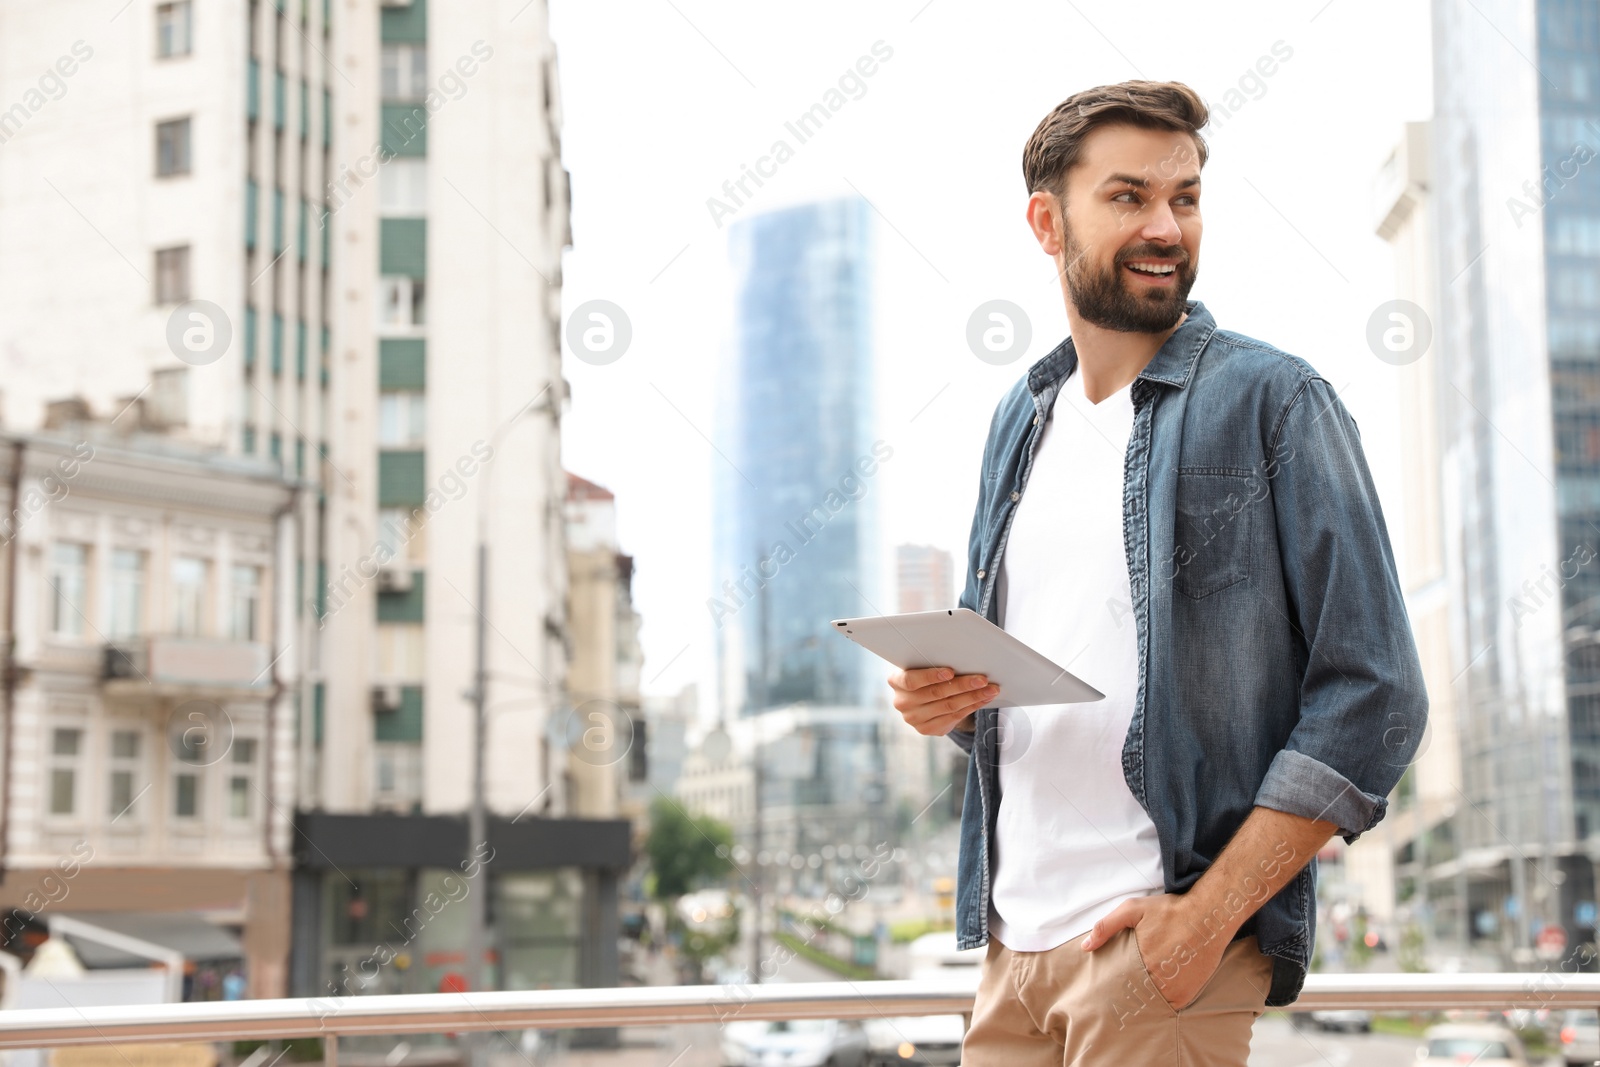 Photo of Handsome man working with tablet on city street